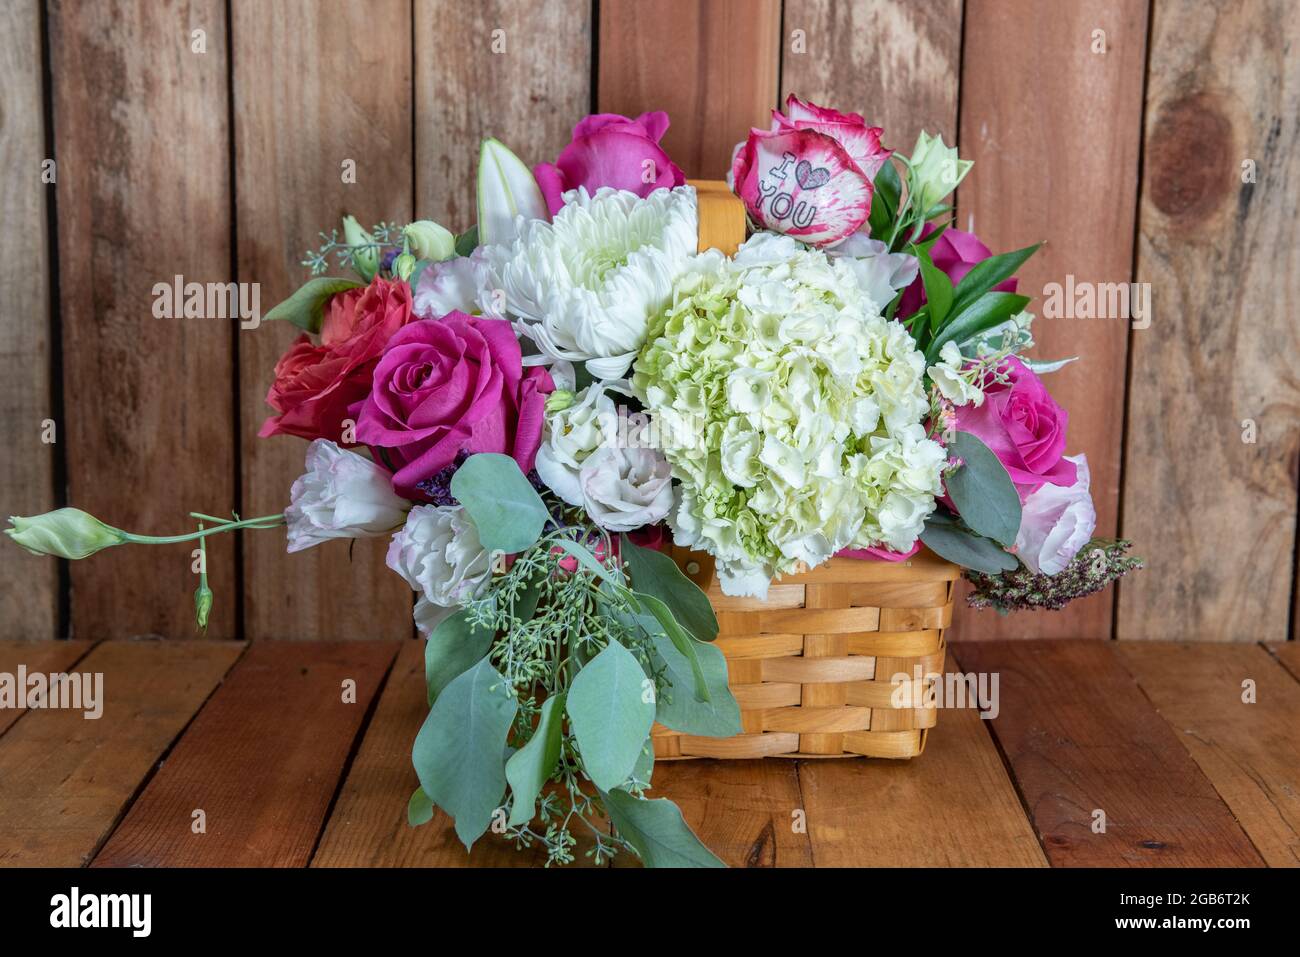 Beautiful basket bouquet of arranged roses and white flowers given as an emotional sentiment of I Love You. Stock Photo